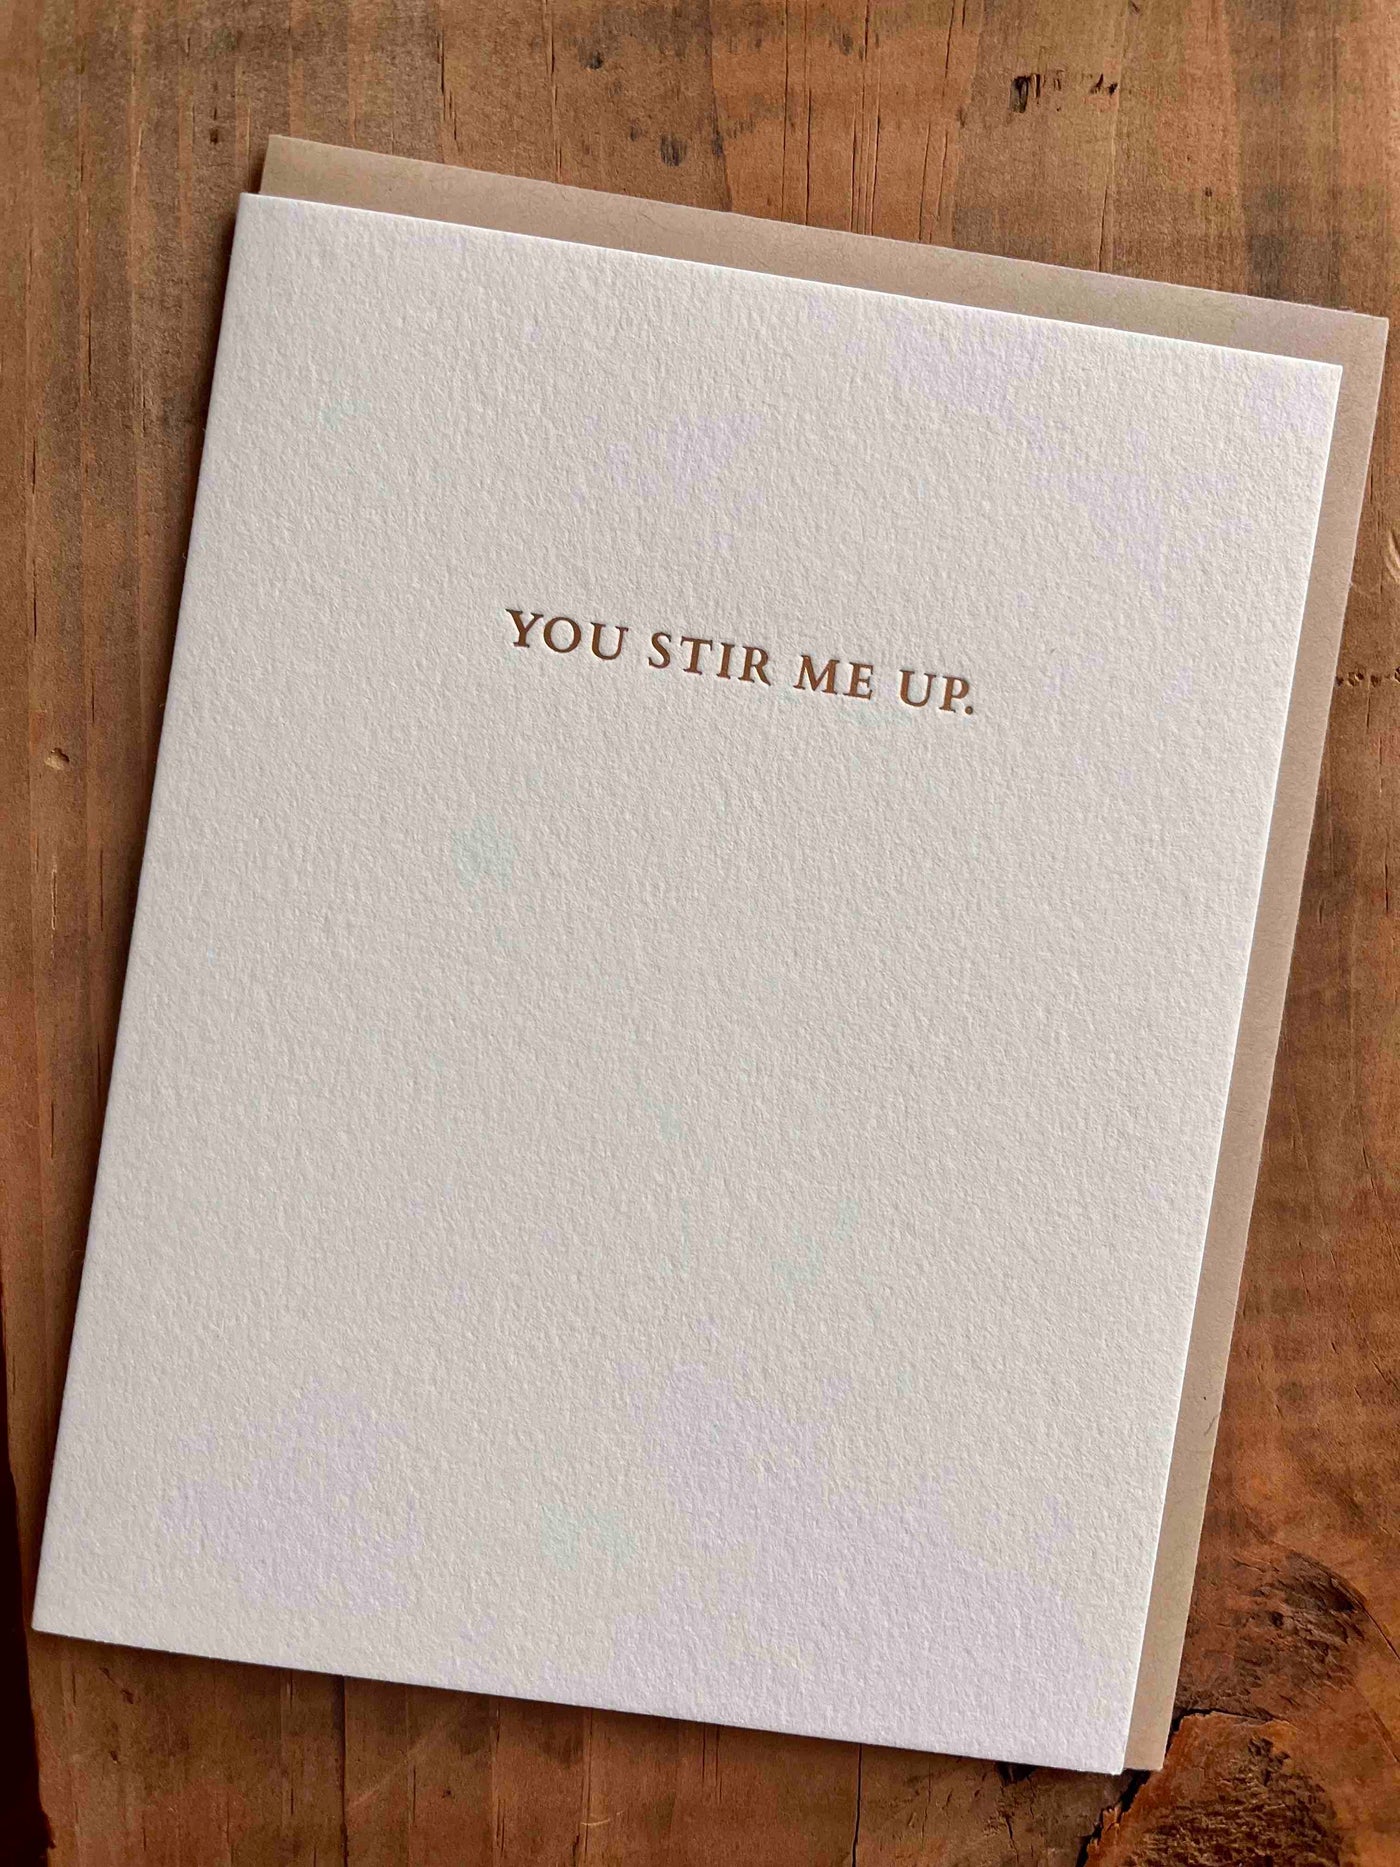 Greeting card on wooden table by beknown. You stir me up